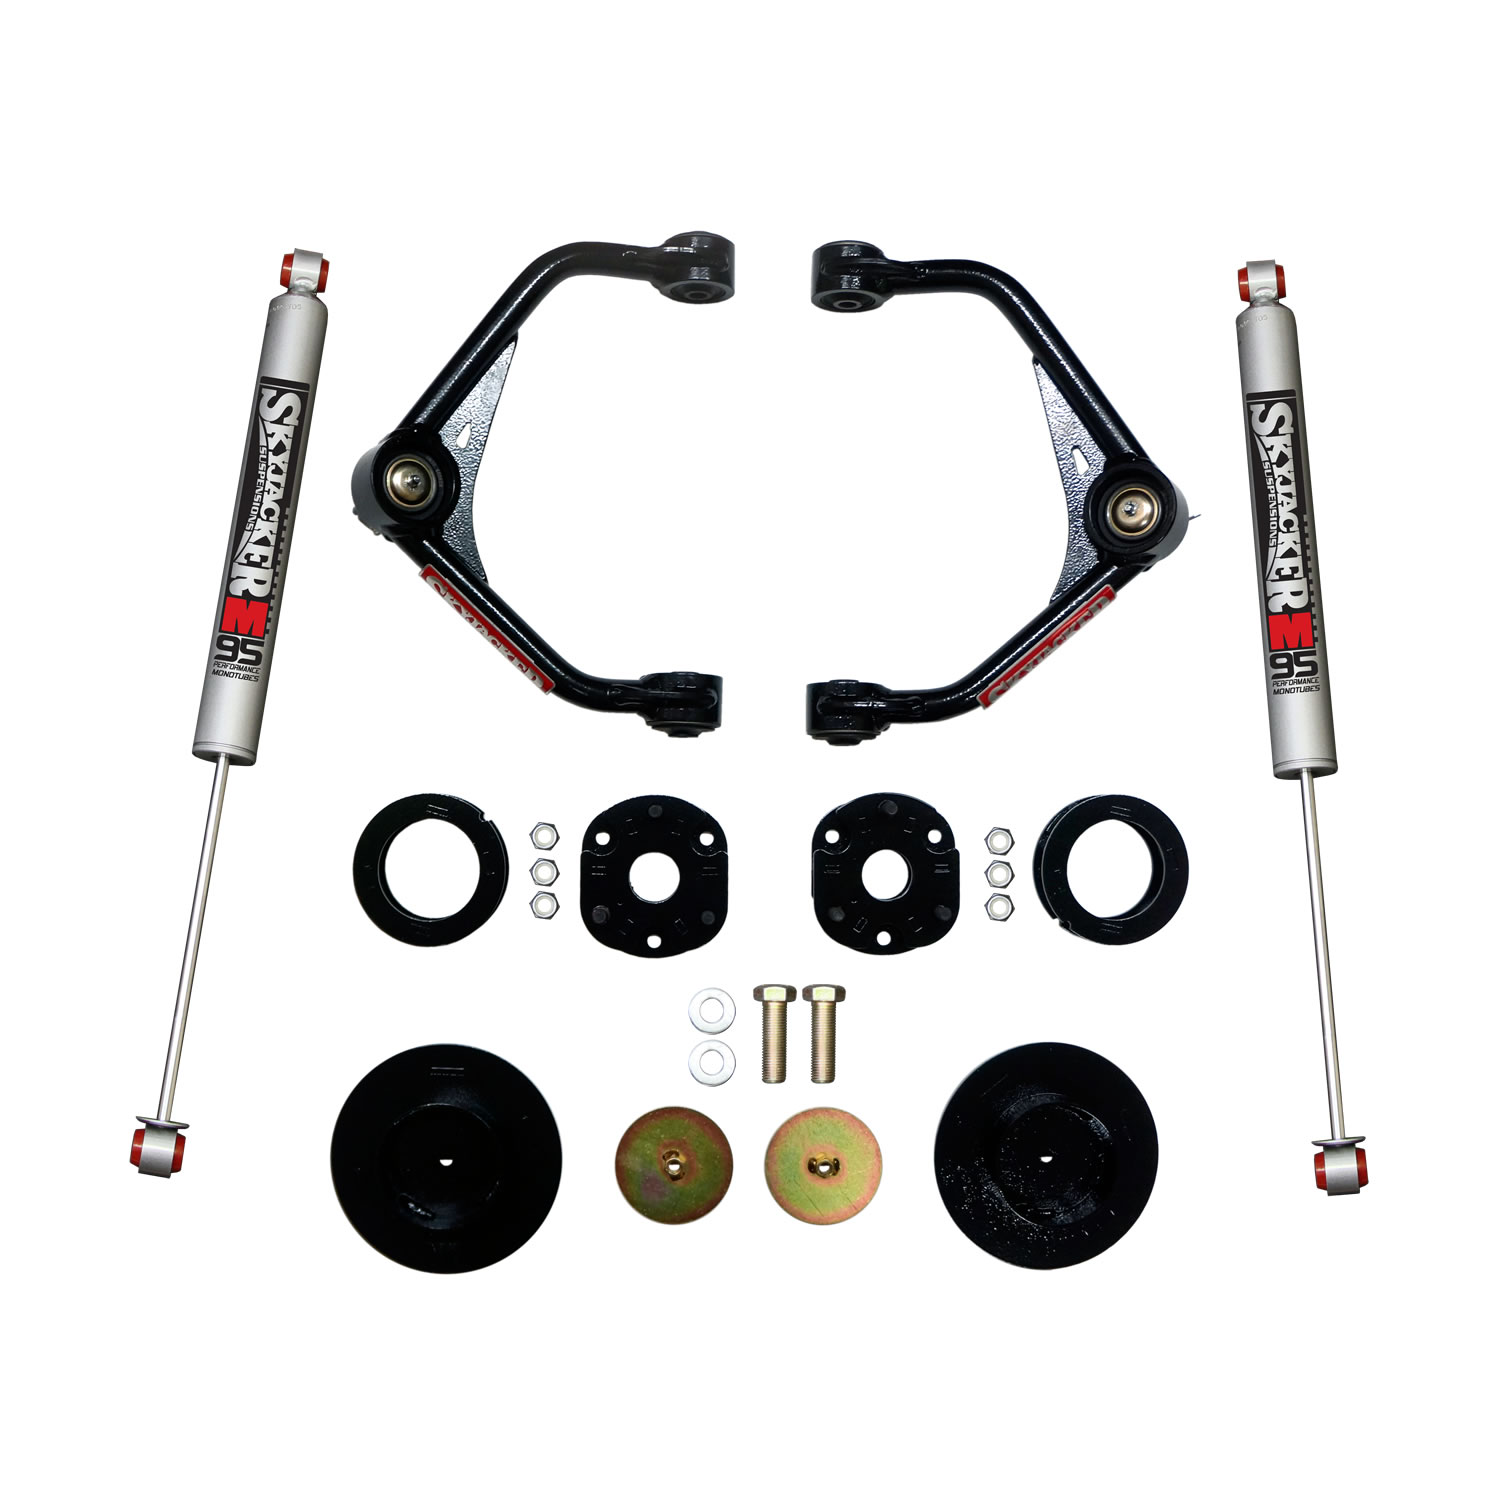 3.000 In. Upper Control Arm Lift Kit with M9500 Shocks for 2012-2018 RAM 1500